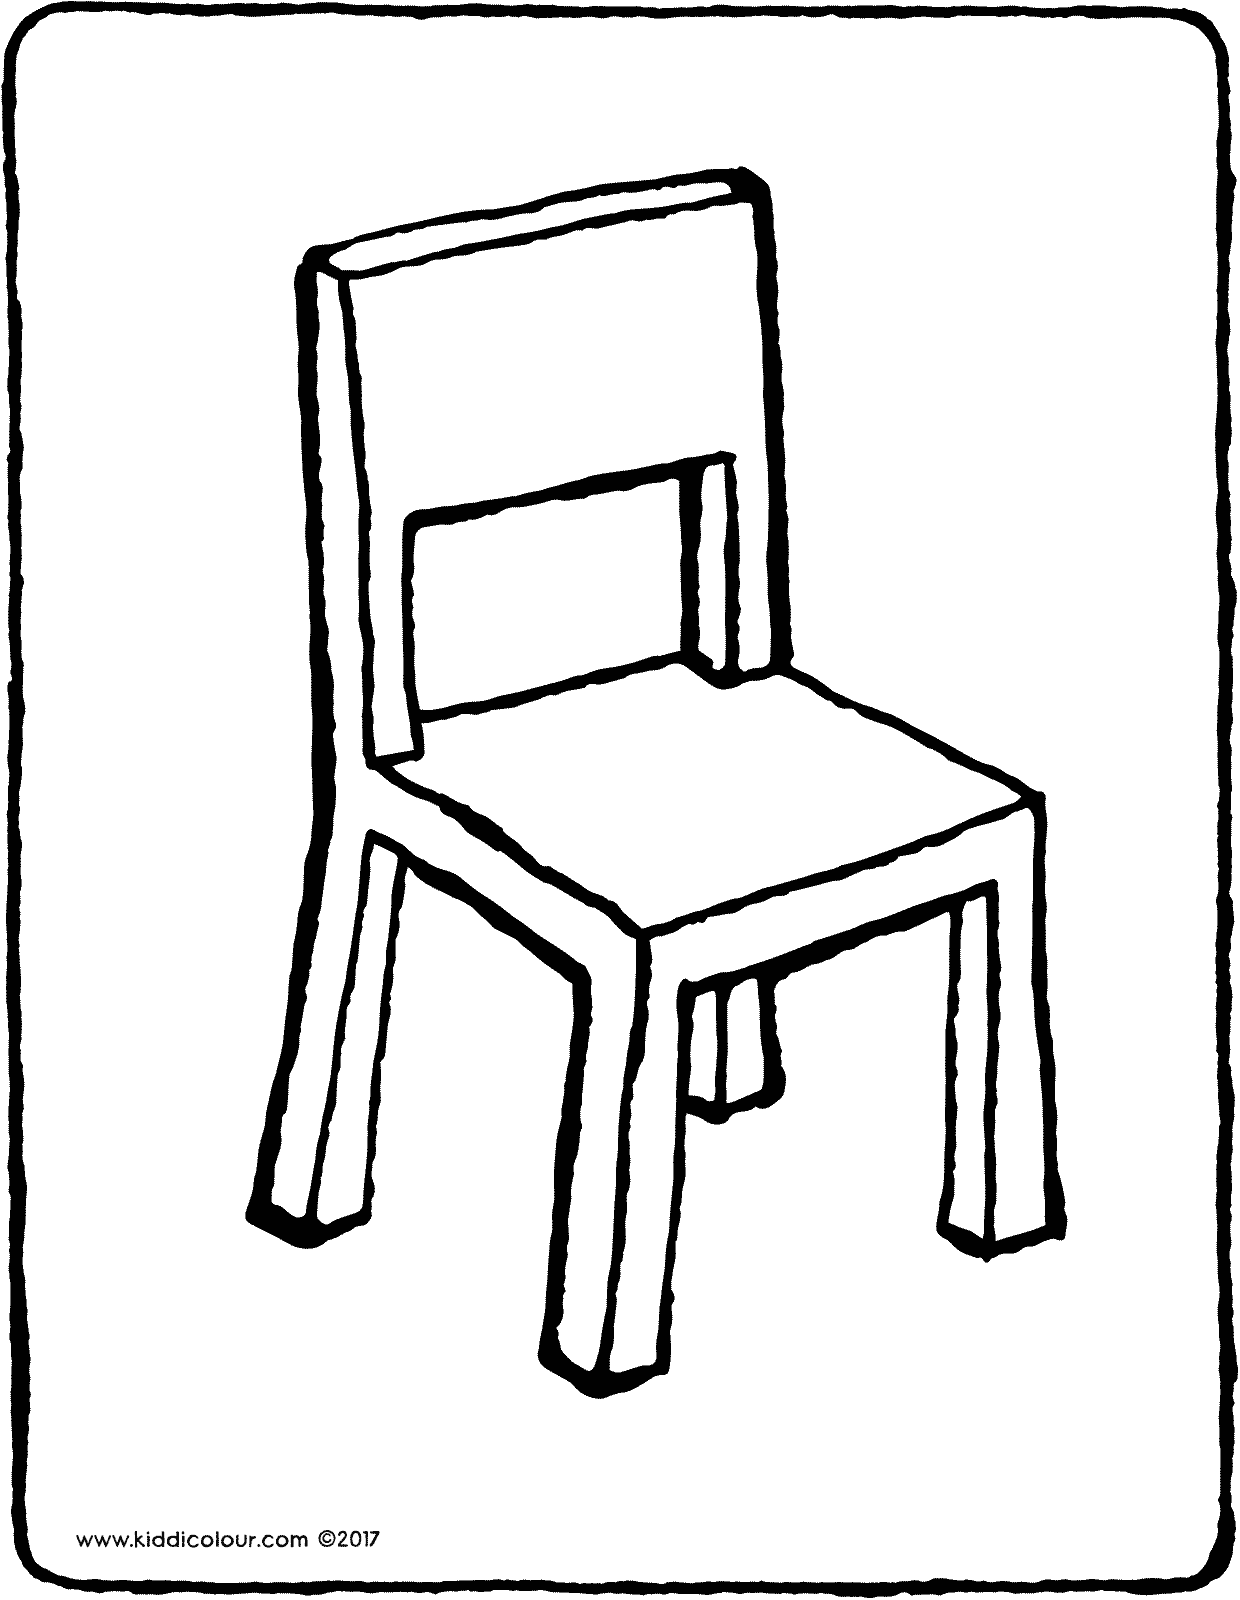 Chair clipart colouring page, Chair colouring page ...